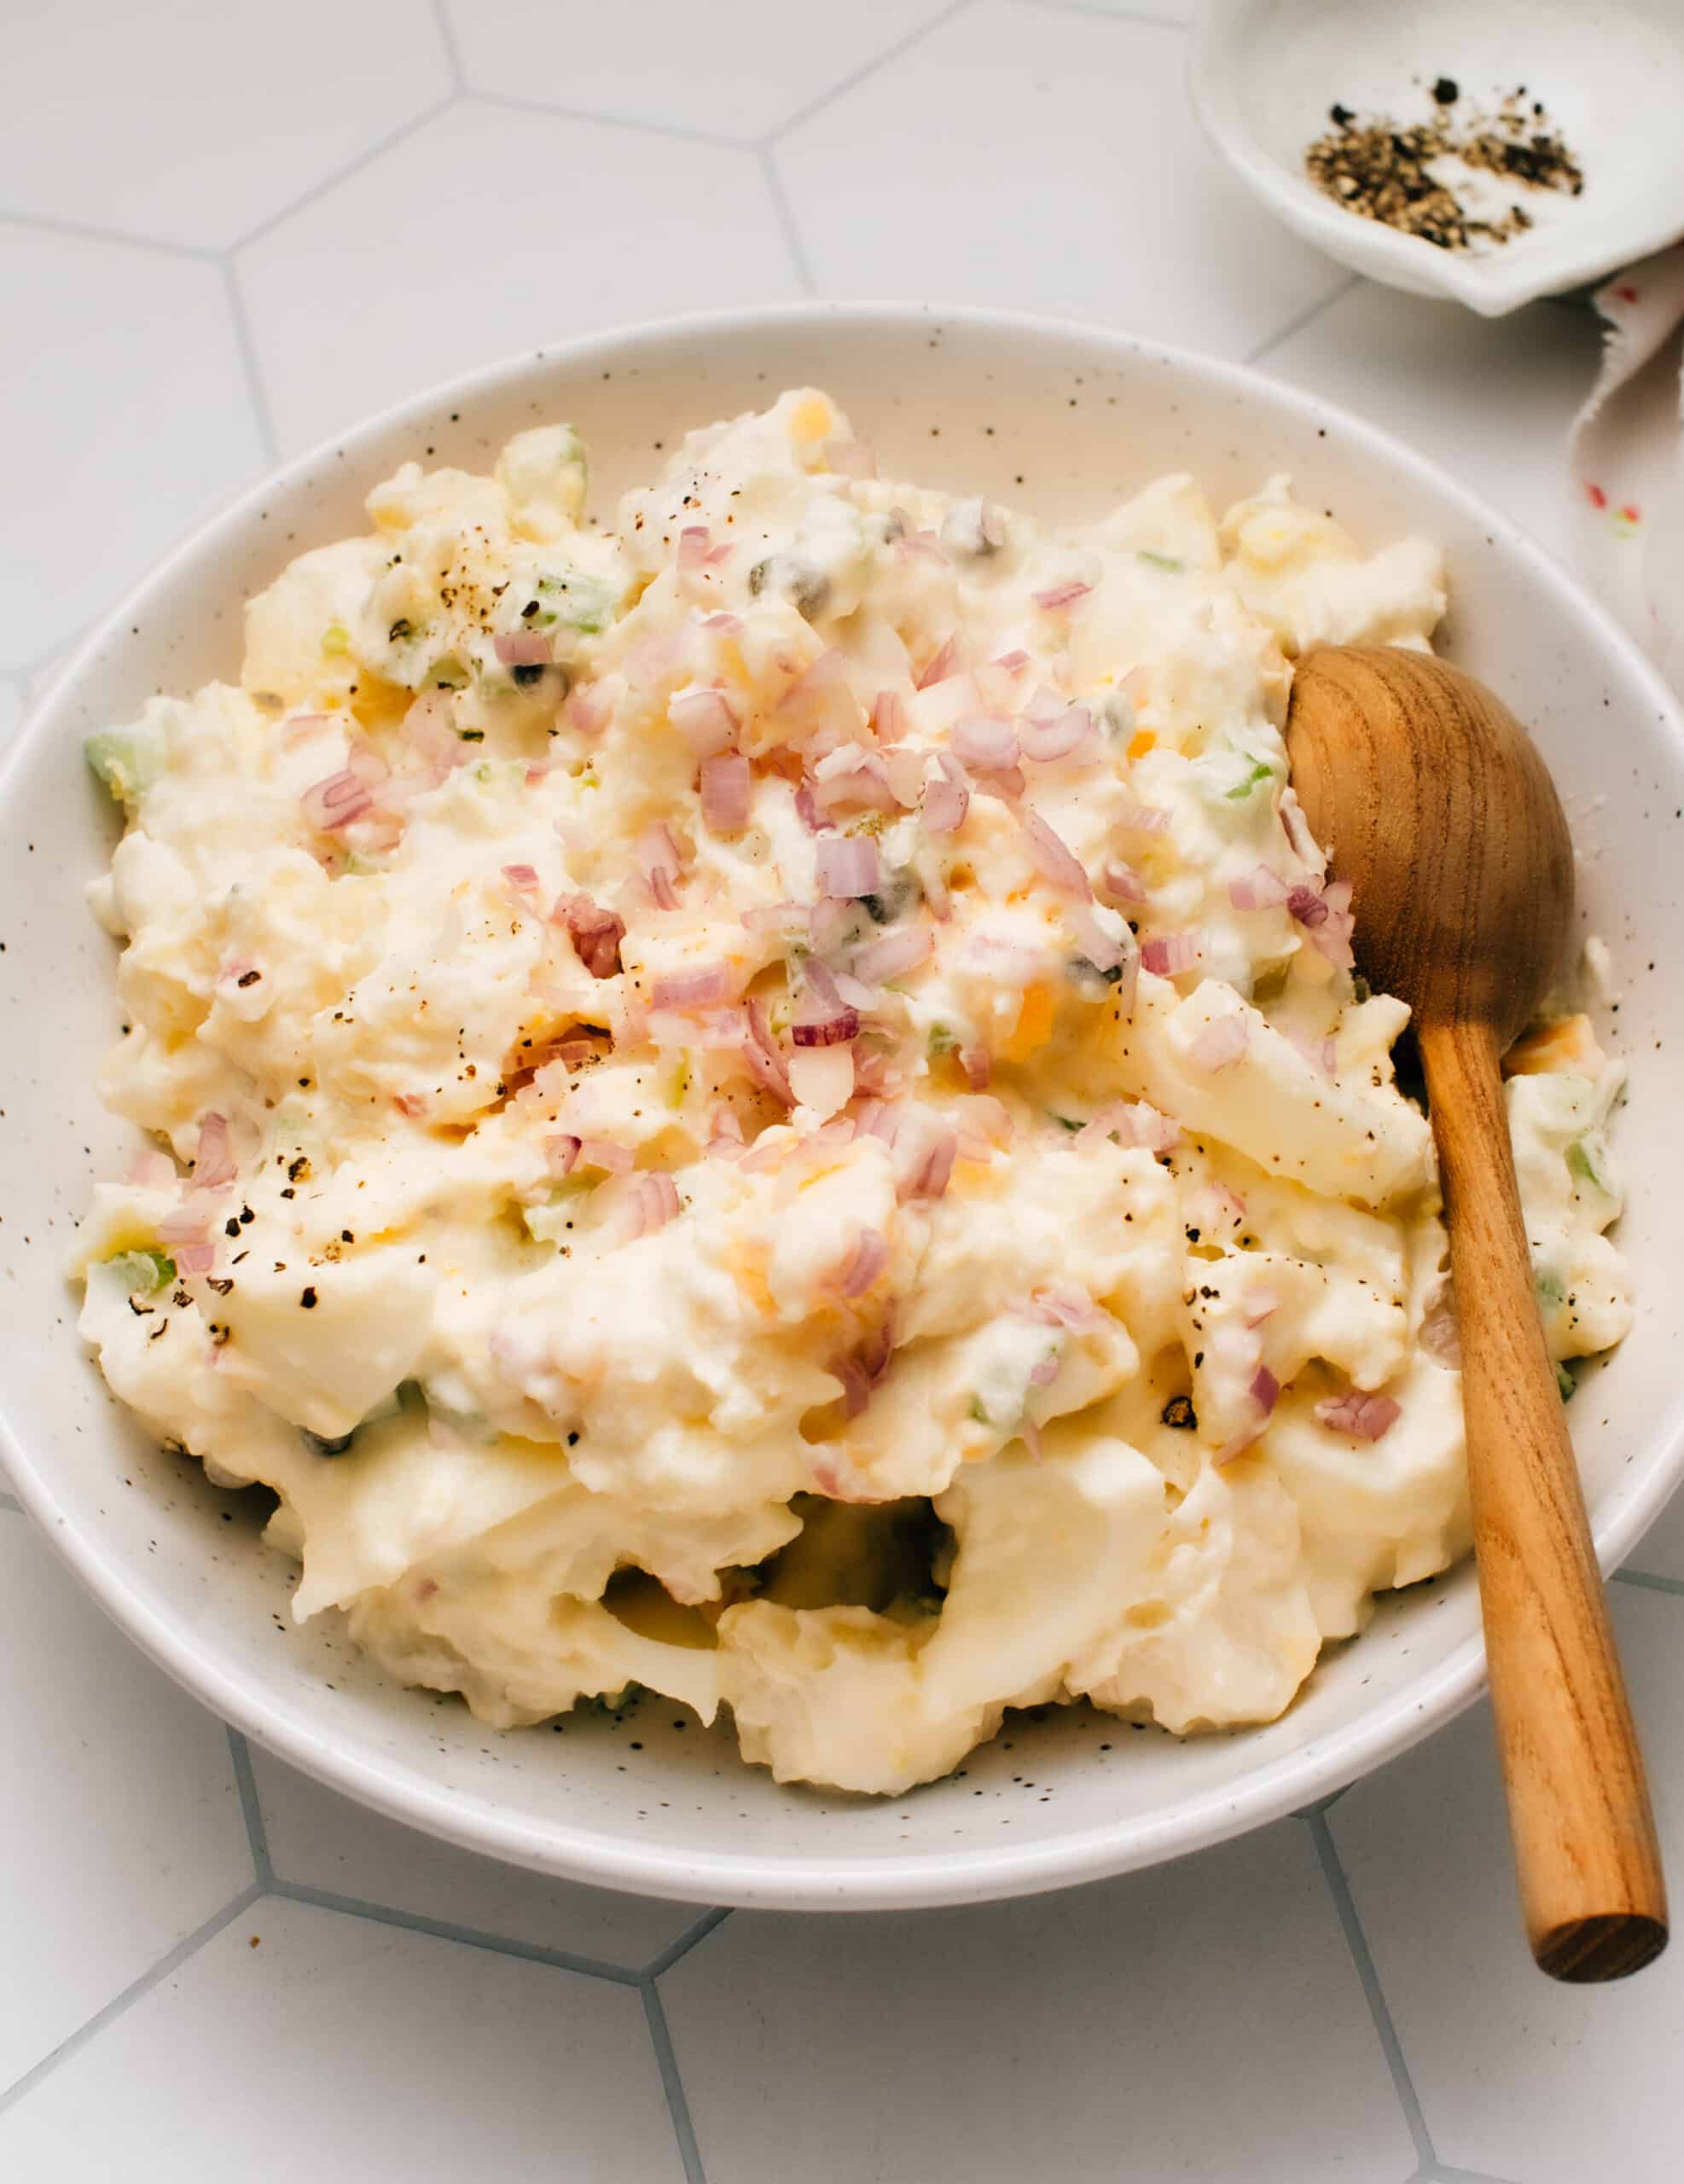 This Classic Homemade Potato Salad with egg recipe is the best I've made. It is super easy with a tangy, lemony, creamy mayonnaise-based dressing that I lighten up with Greek yogurt. The mix-in possibilities are endless with this tested-till-perfect, from-scratch recipe as your canvas